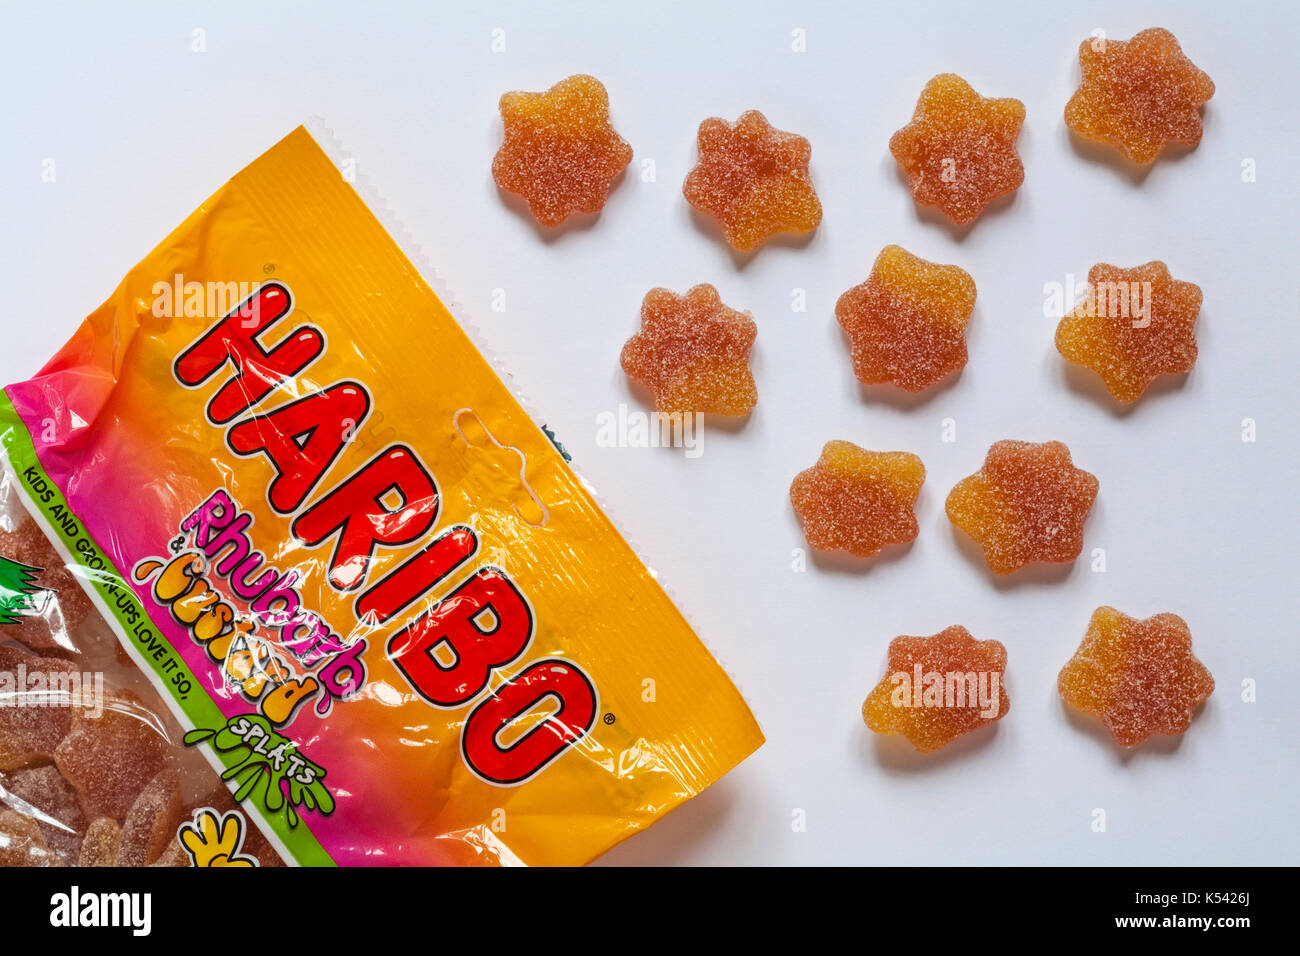 Packet of Haribo Rhubarb & Custard splats opened with contents spilled set on white background Stock Photo